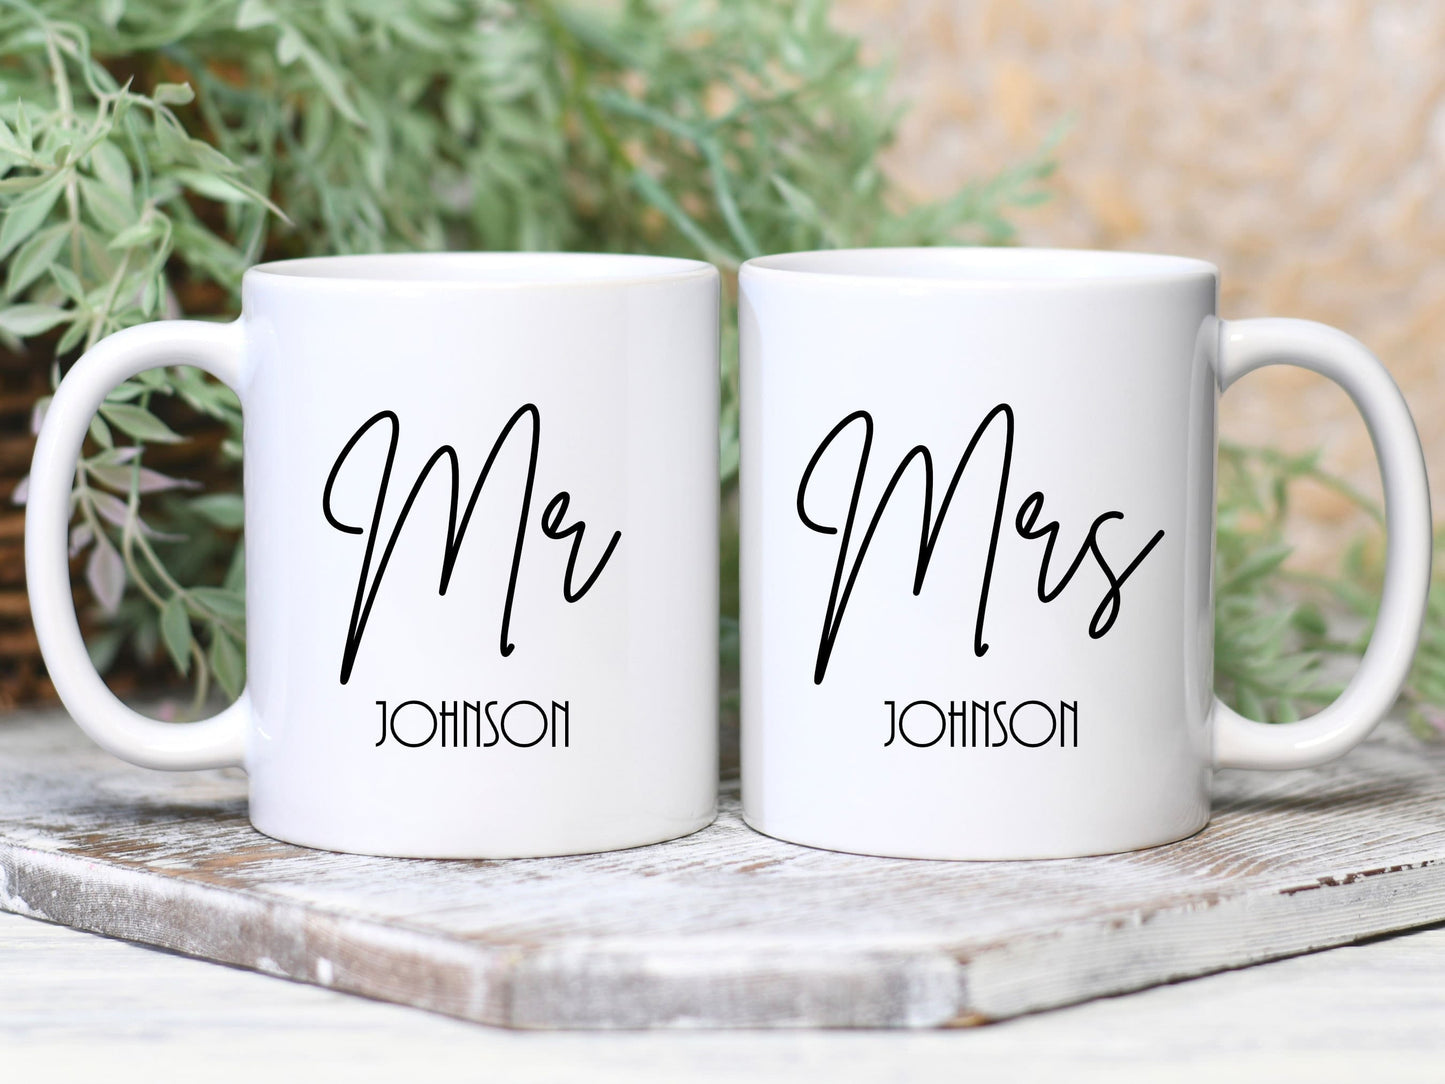 set of two white mugs. One has Mr printed on in a script font with a surname below. The other has Mrs printed on